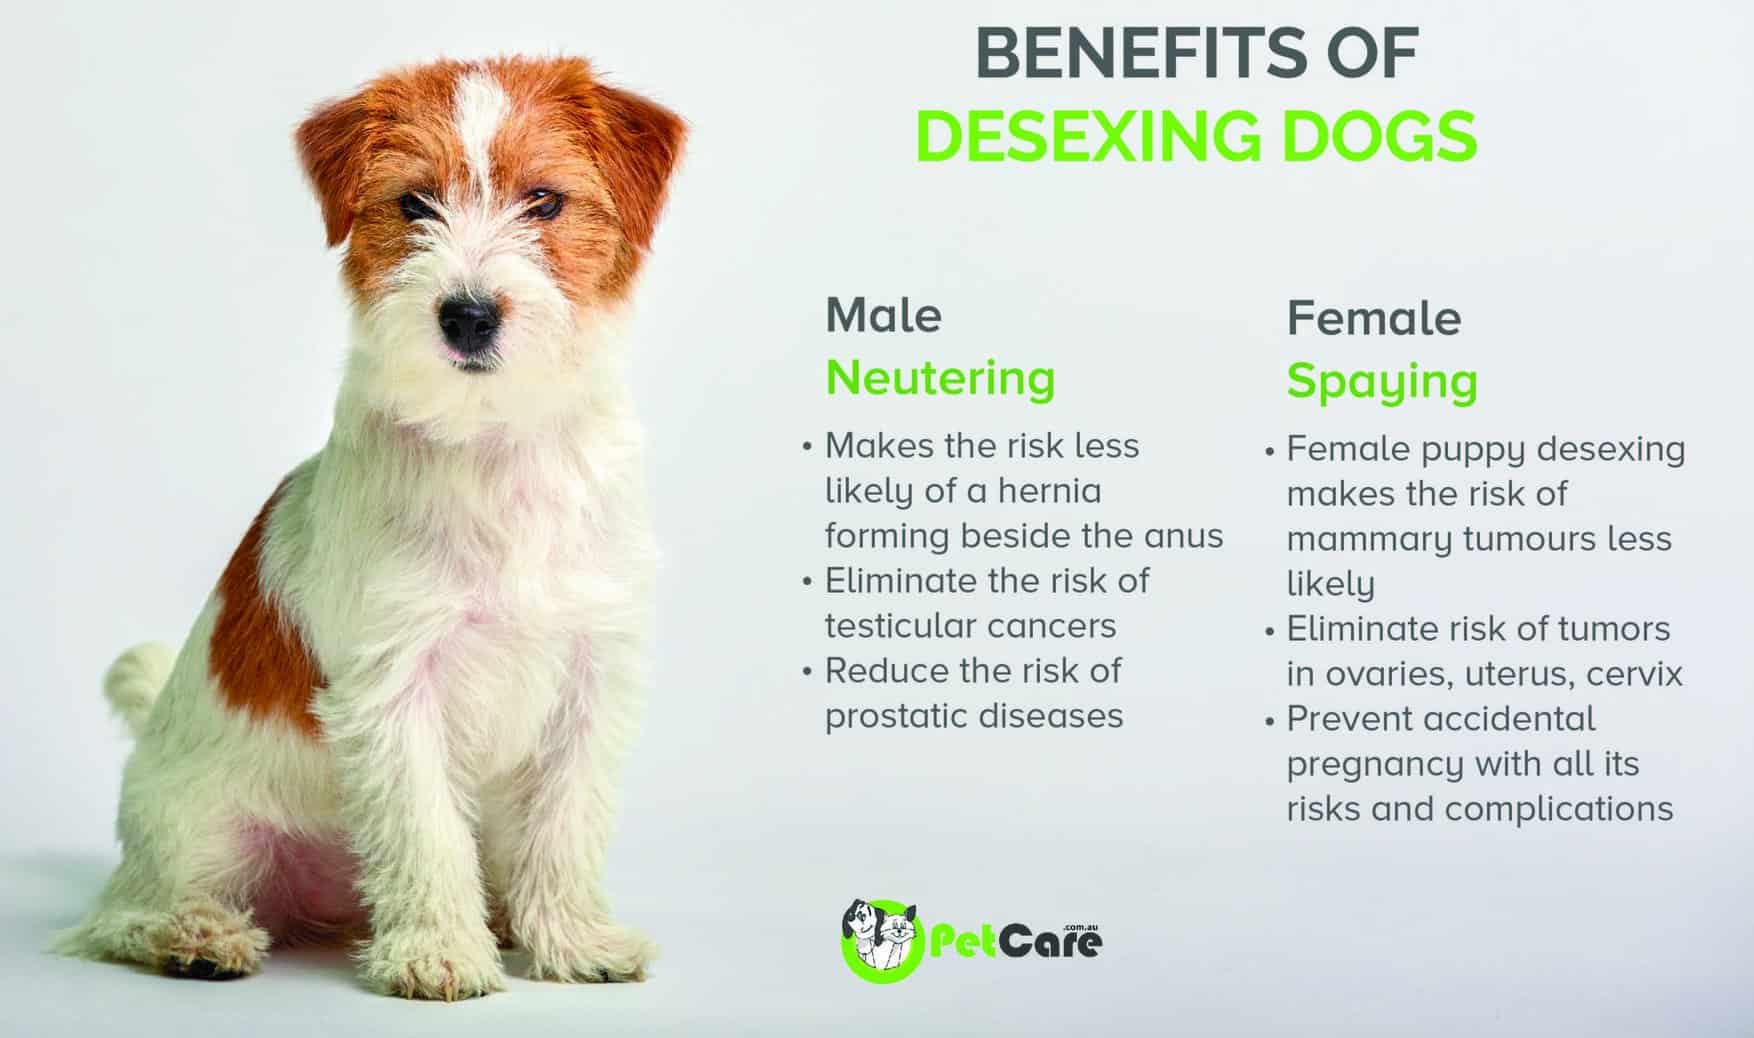 Benefits of desexing puppies